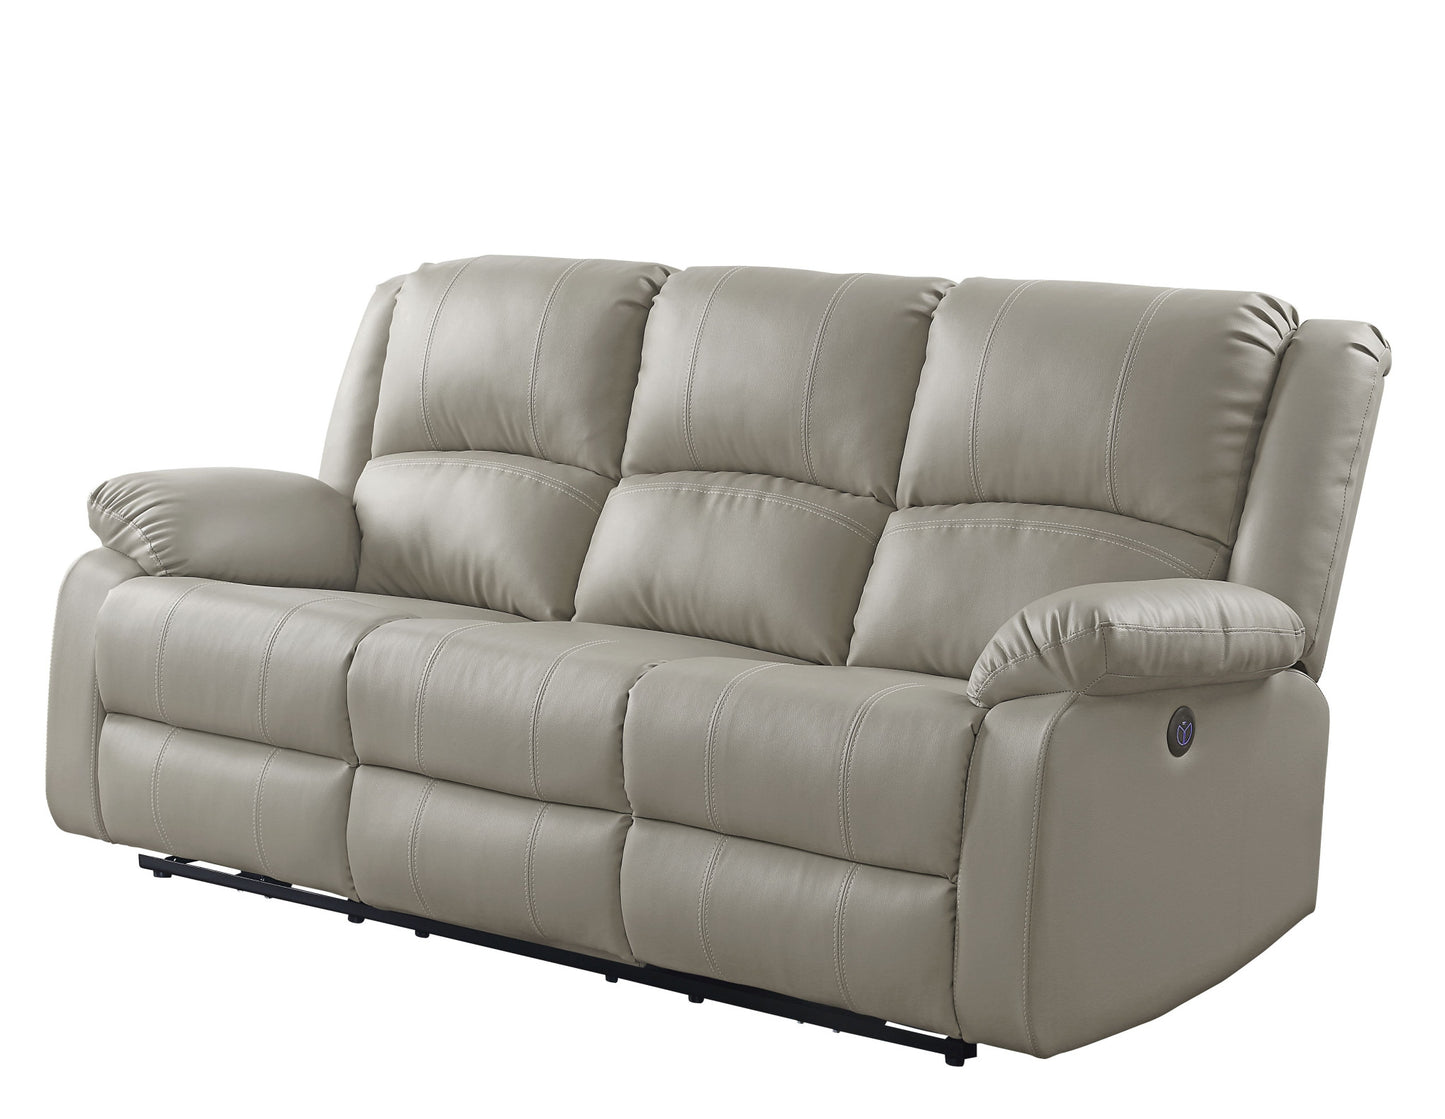 81" Beige And Black Faux Leather Reclining USB Sofa